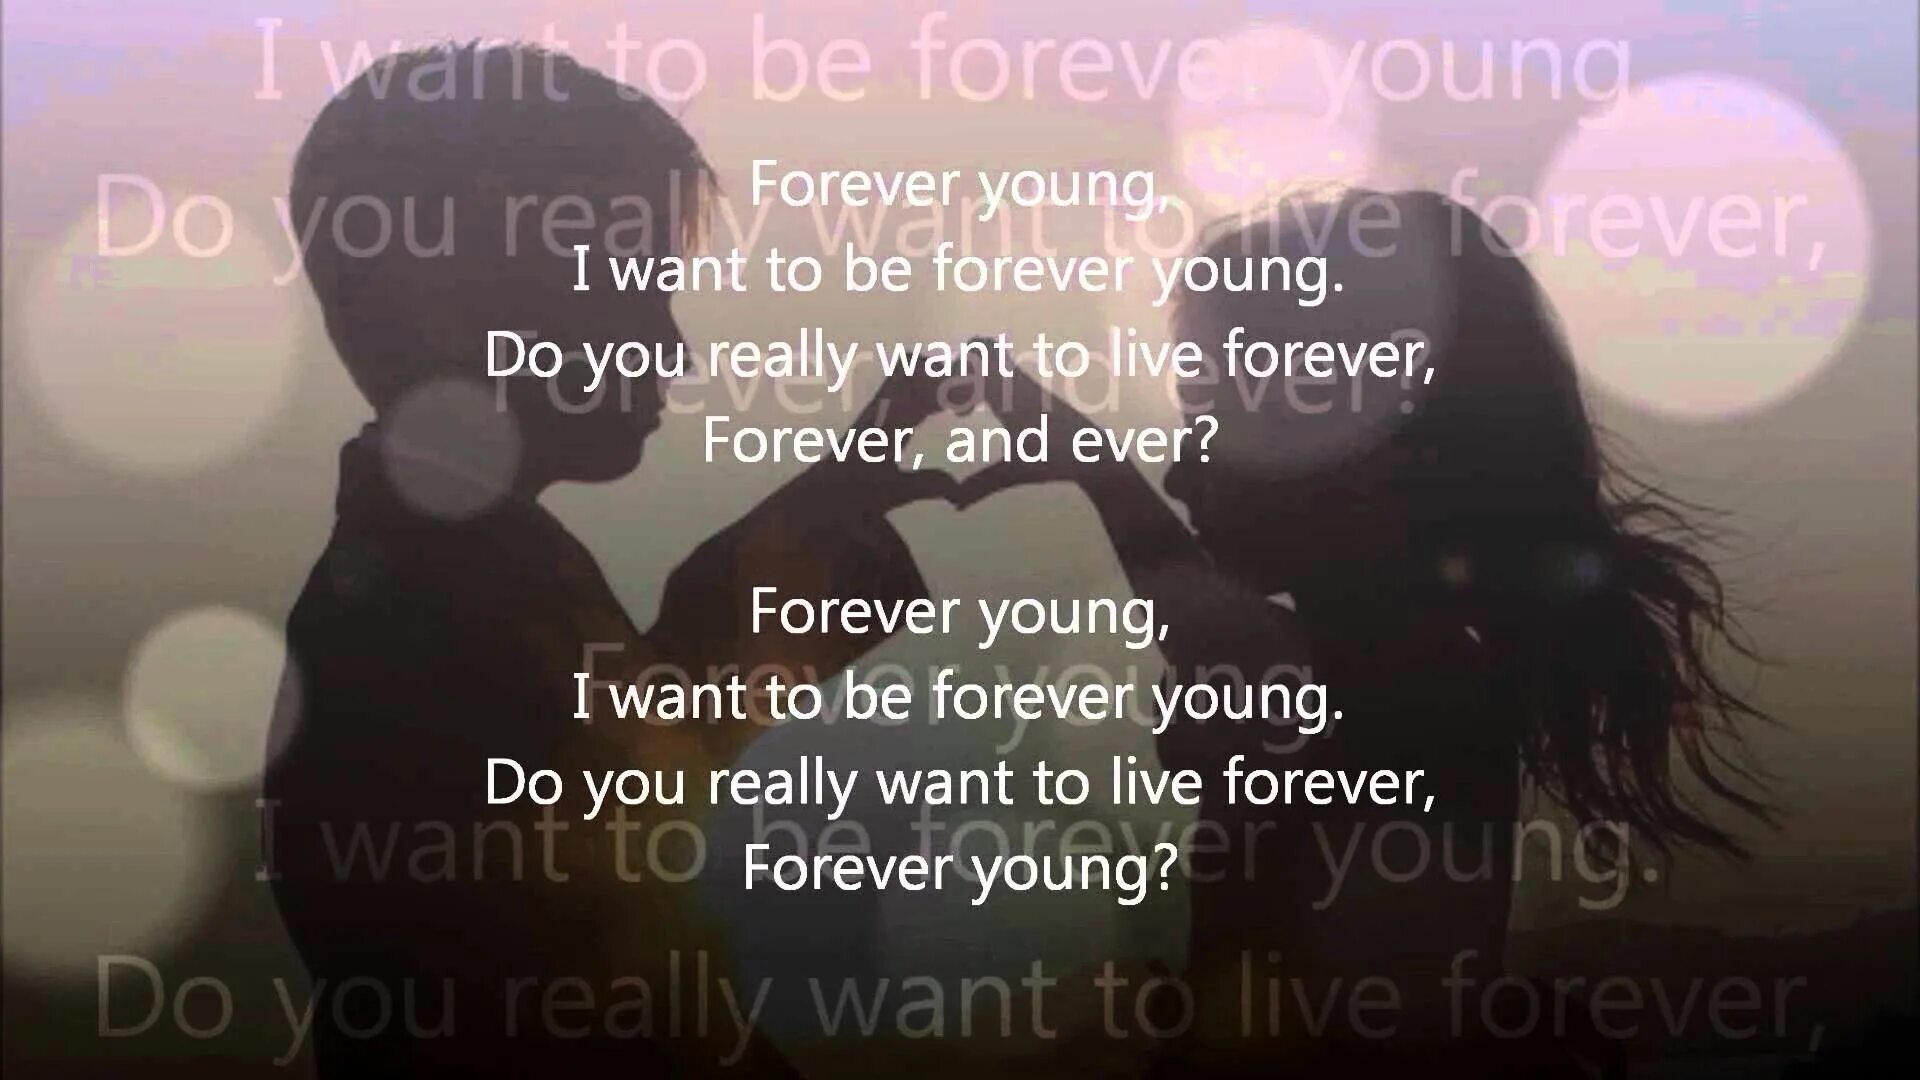 I wanna be Forever young. Forever young Alphaville Lyrics. I wanna be Forever young Alphaville. Forever young i want to be Forever young. Нужна текст янг